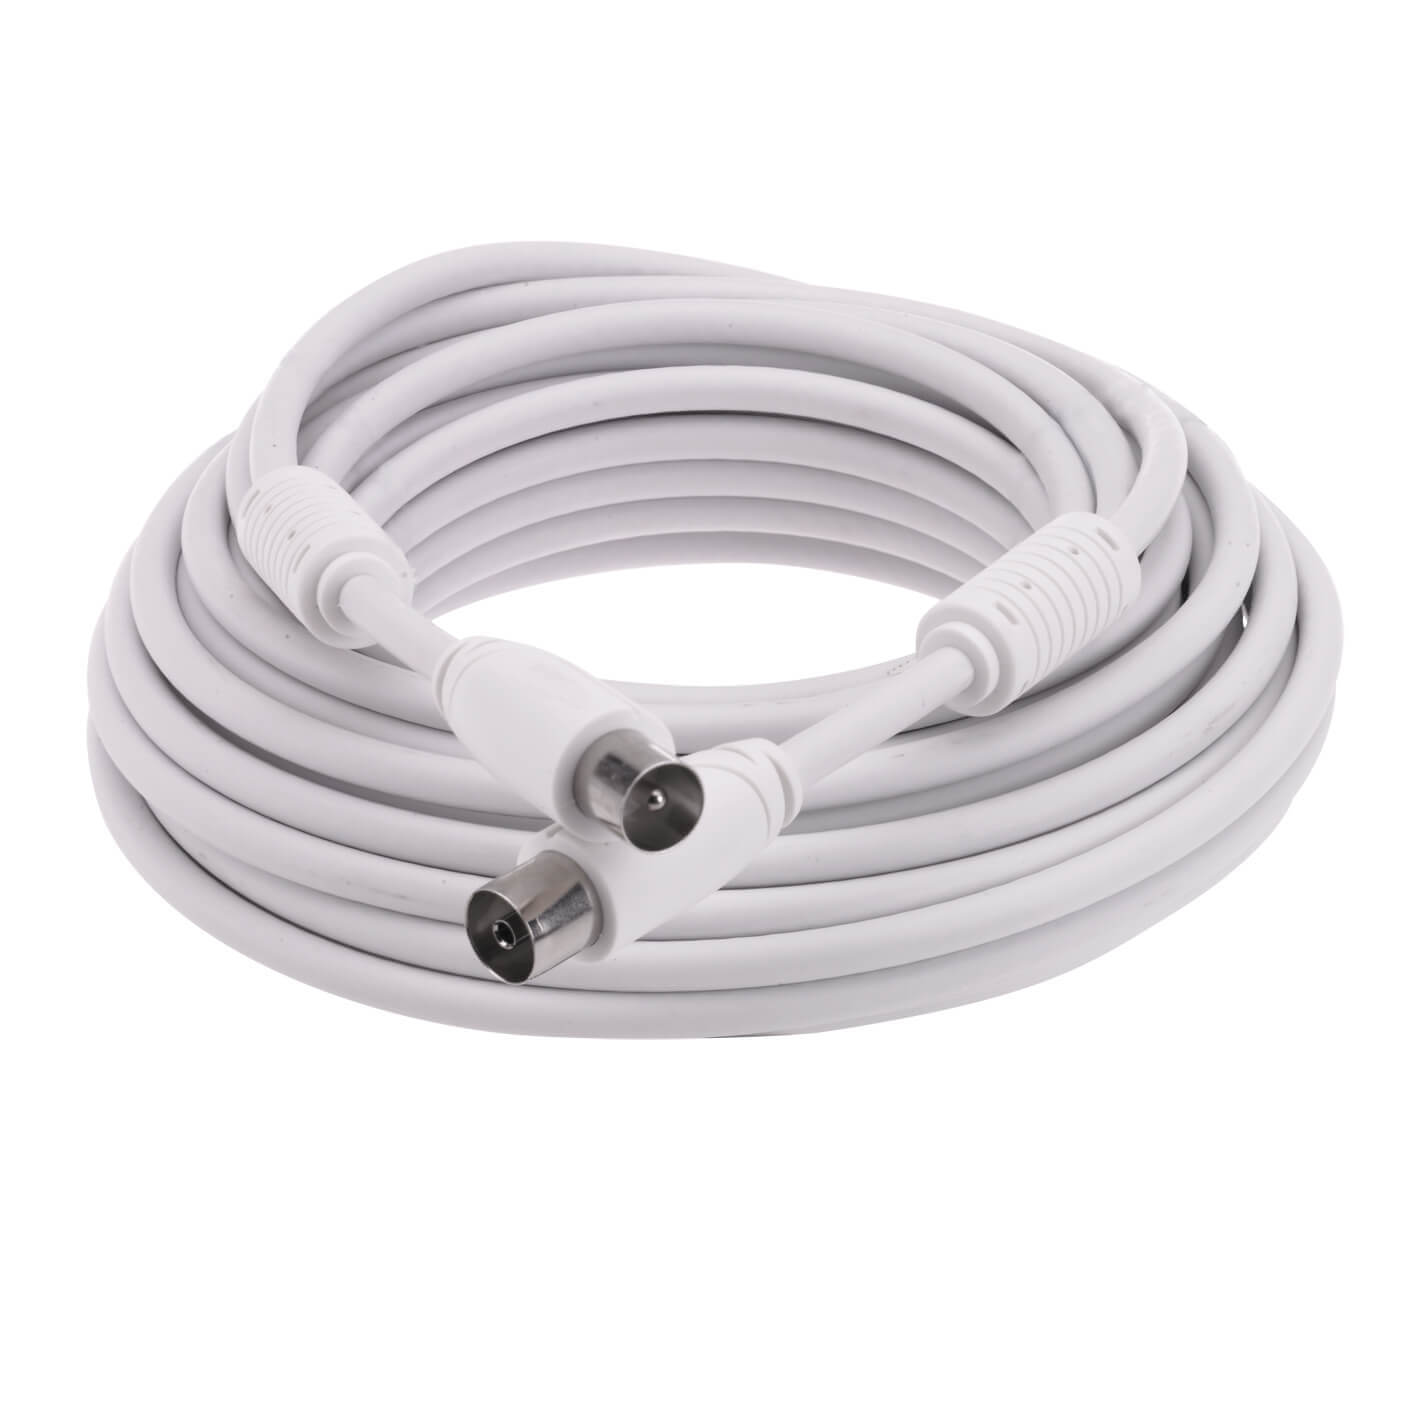 Antenna Extension Cable, 10 m , White